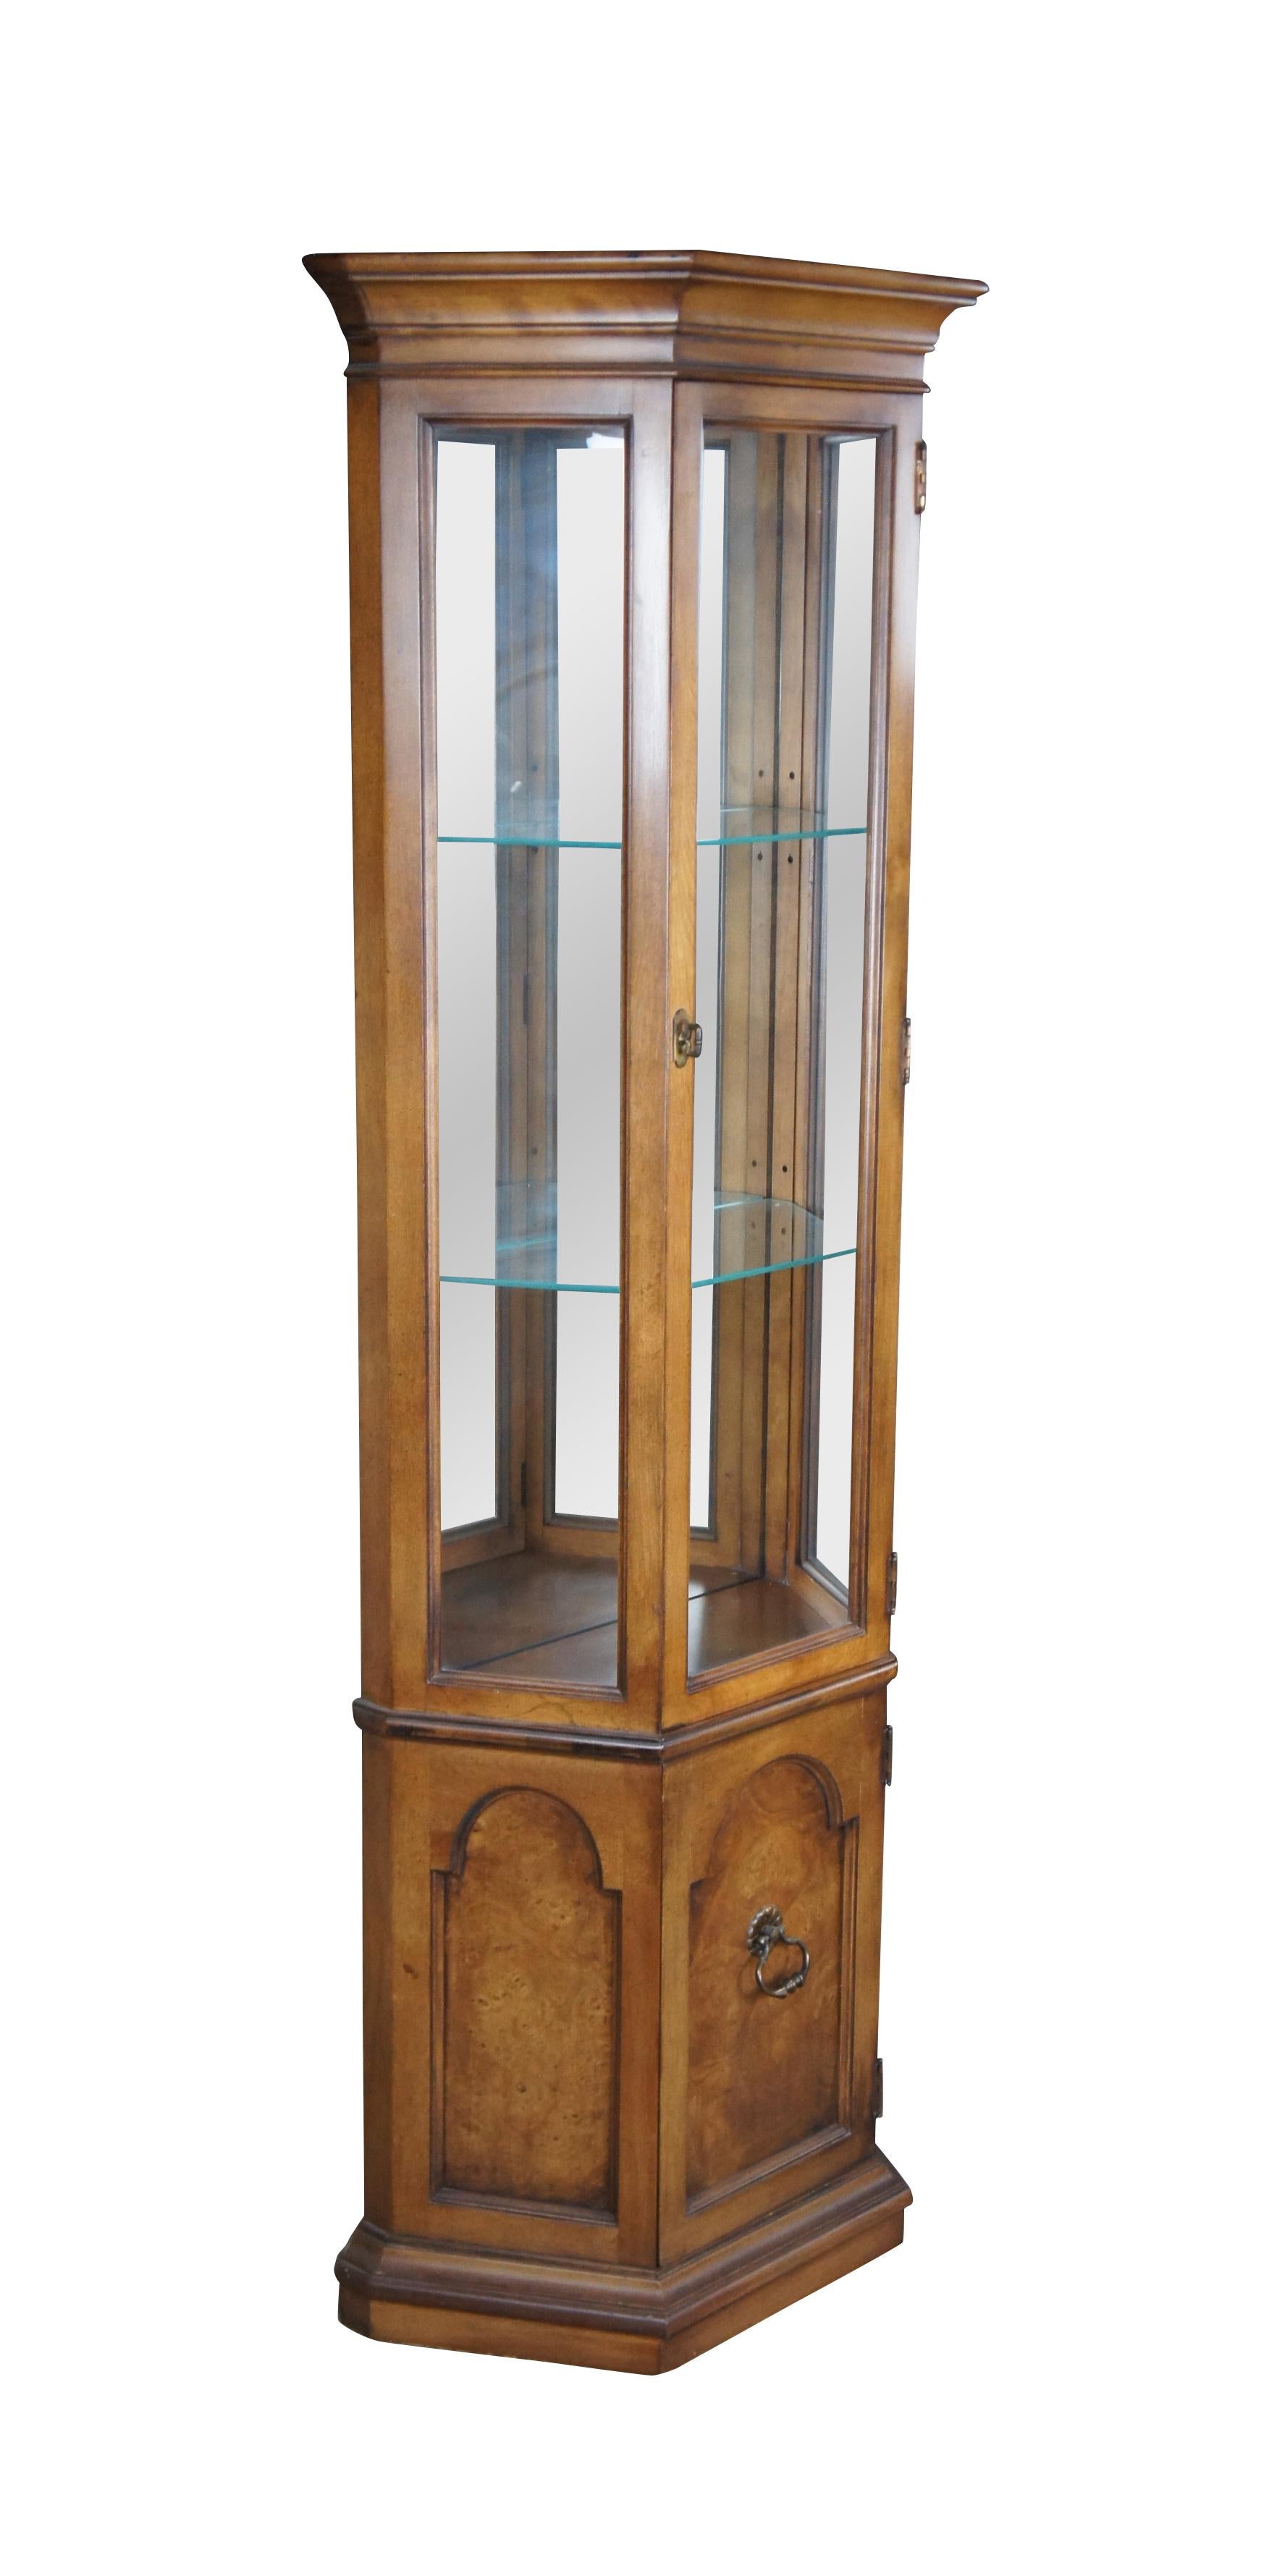 Vintage American of Chicago curio cabinet or display case.  Made of walnut featuring a three sided half hexagon design with paneled cabinet base supporting a tall curio cabinet with adjustable tiered shelving.

Dimensions:
24.5